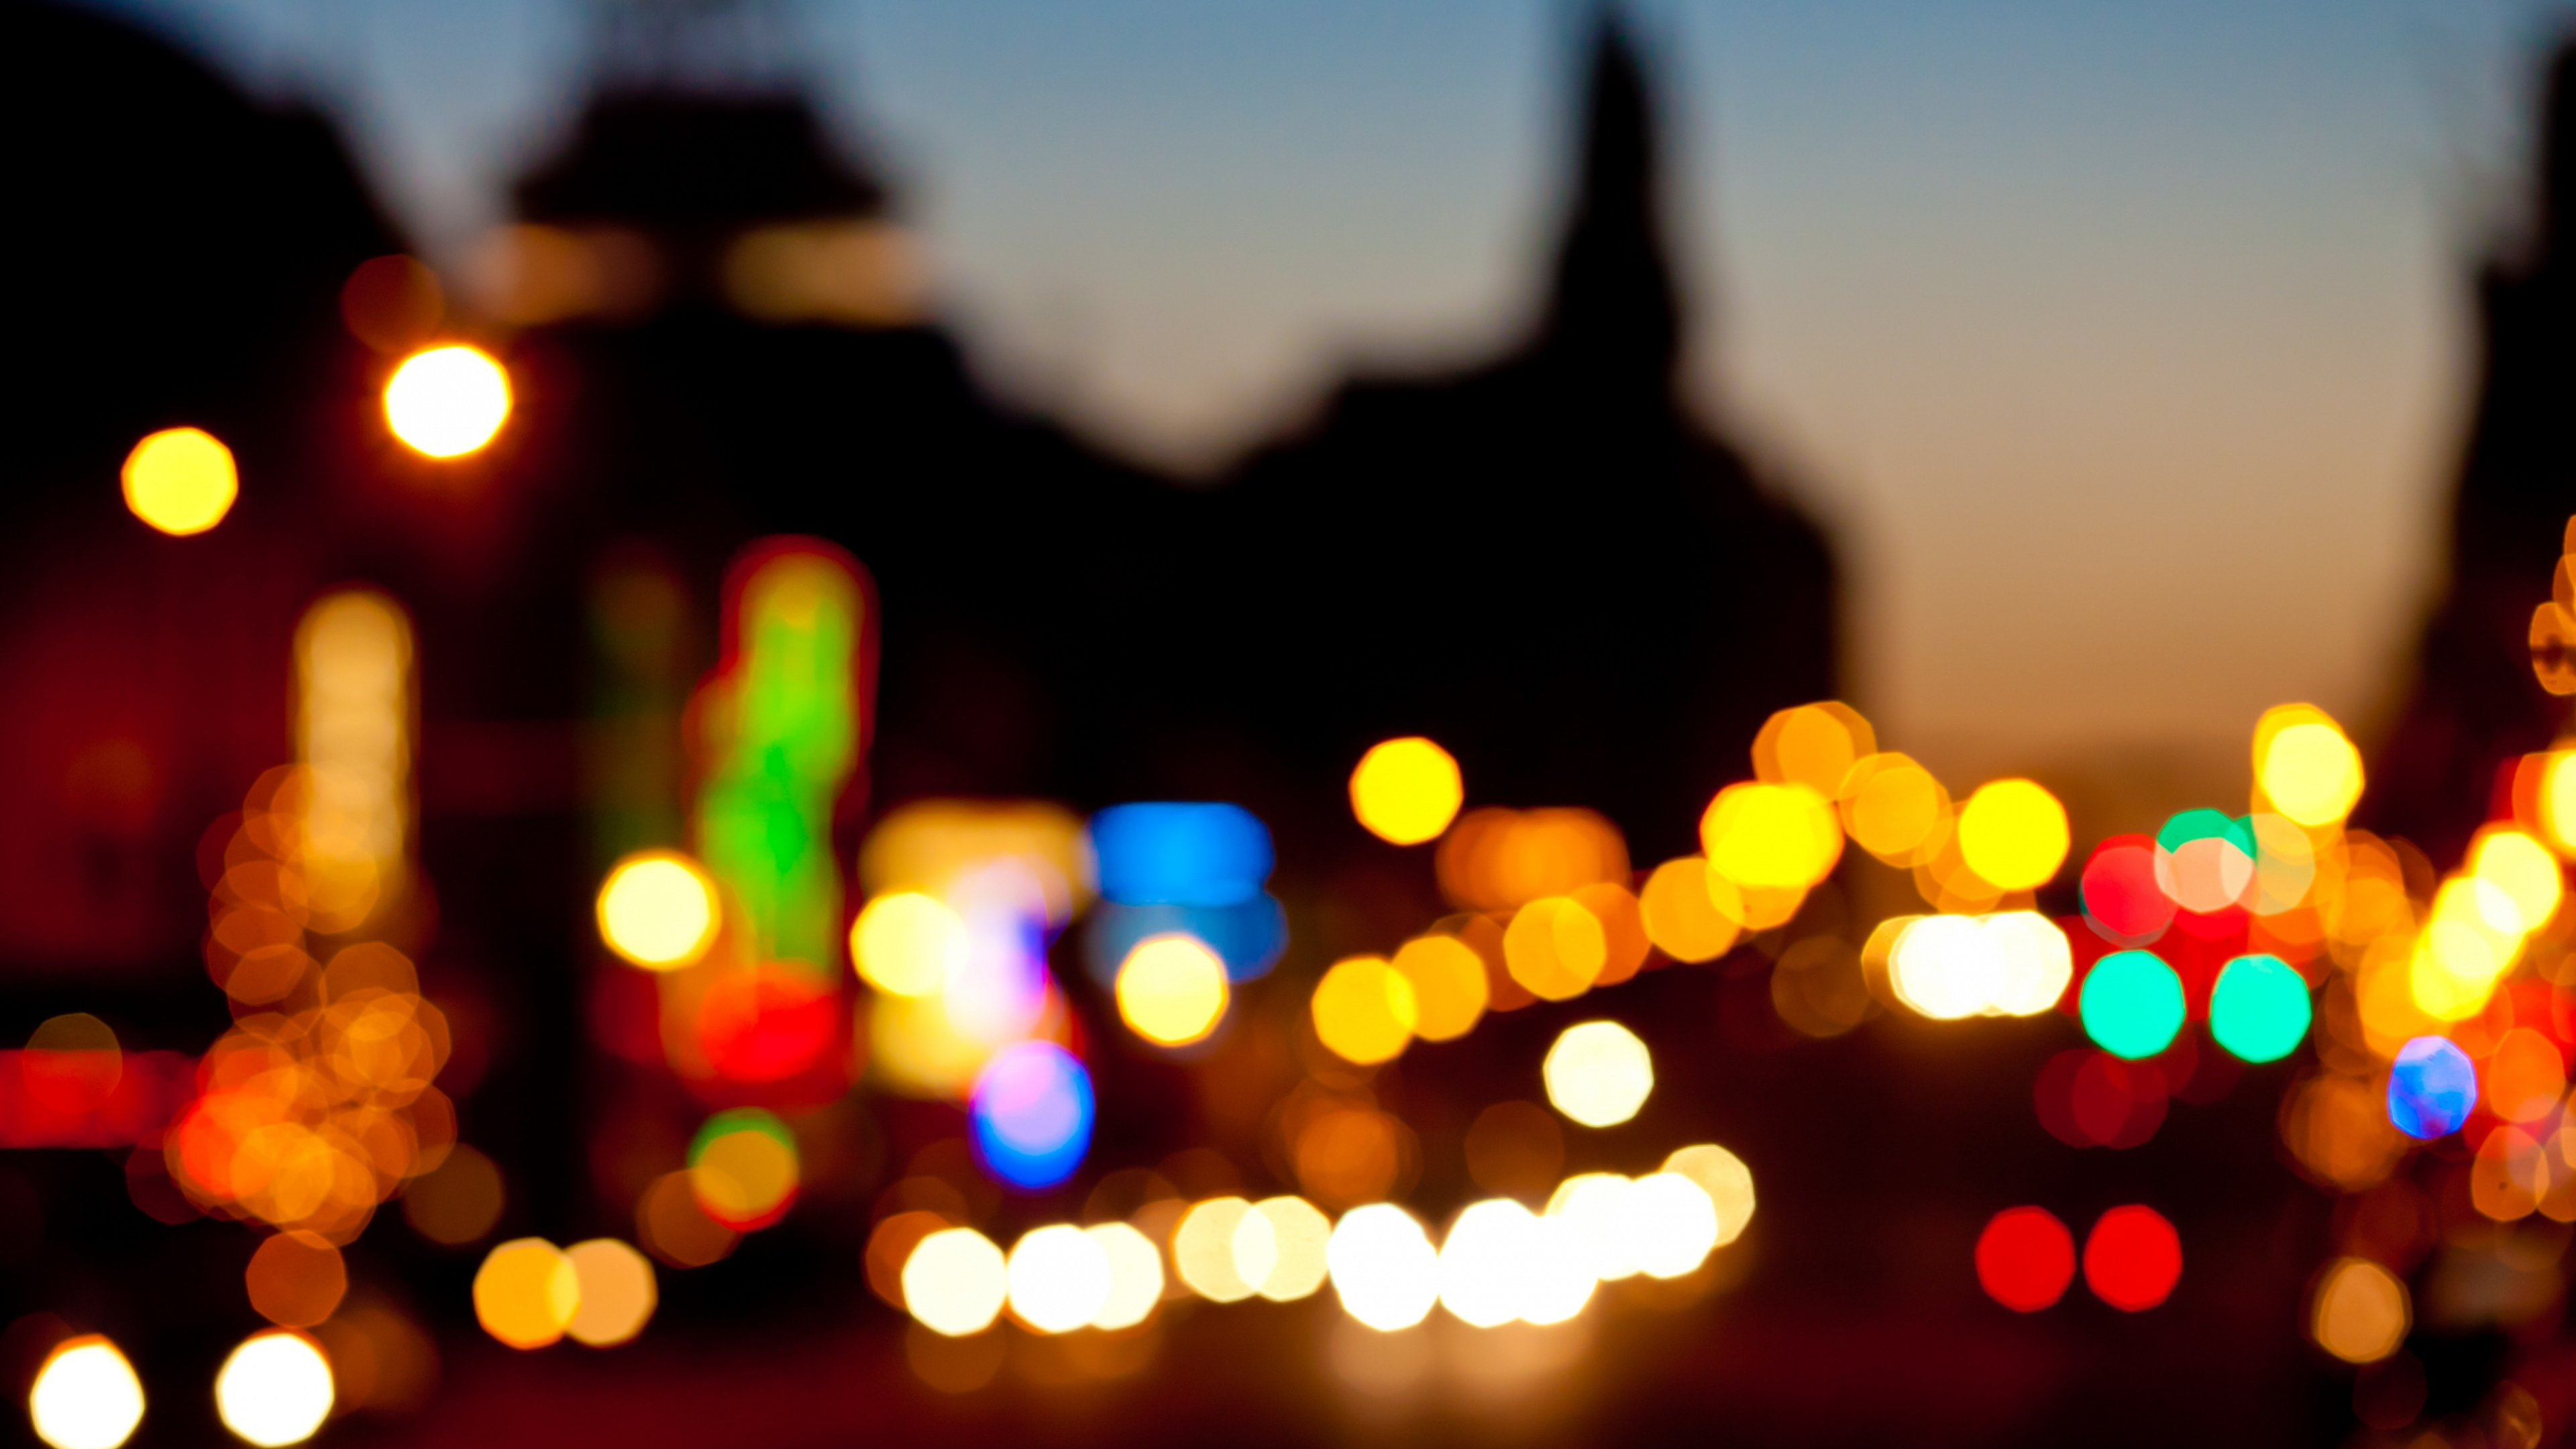 Bokeh Photography of City Lights During Night Time. Wallpaper in 3840x2160 Resolution